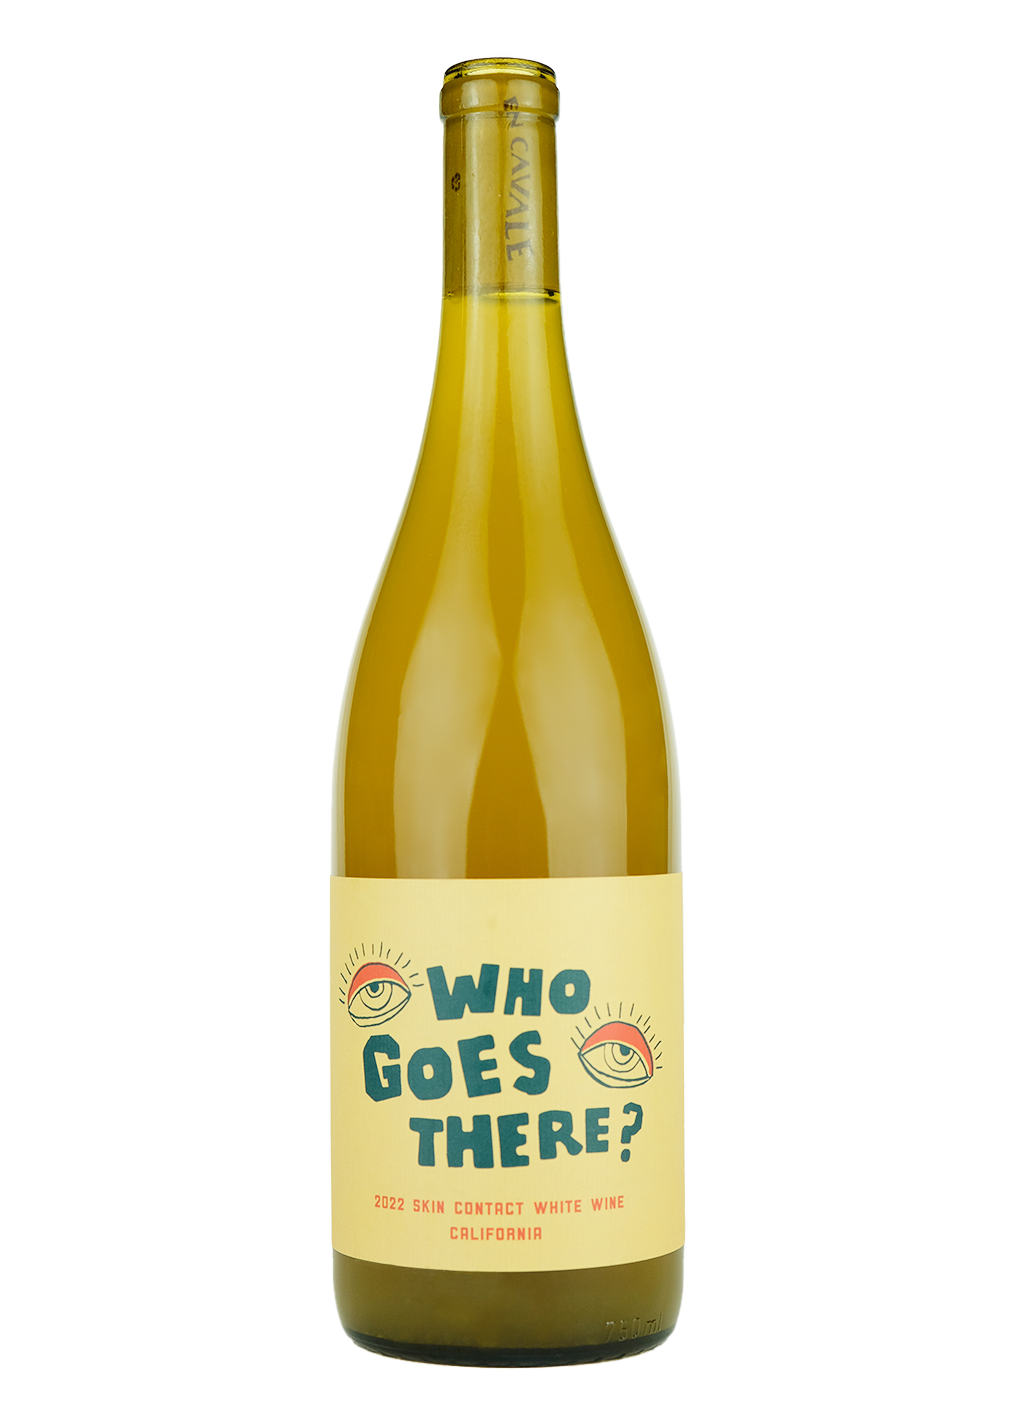 En Cavale 2022 Skin Ferment White Wine ‘Who Goes There?’